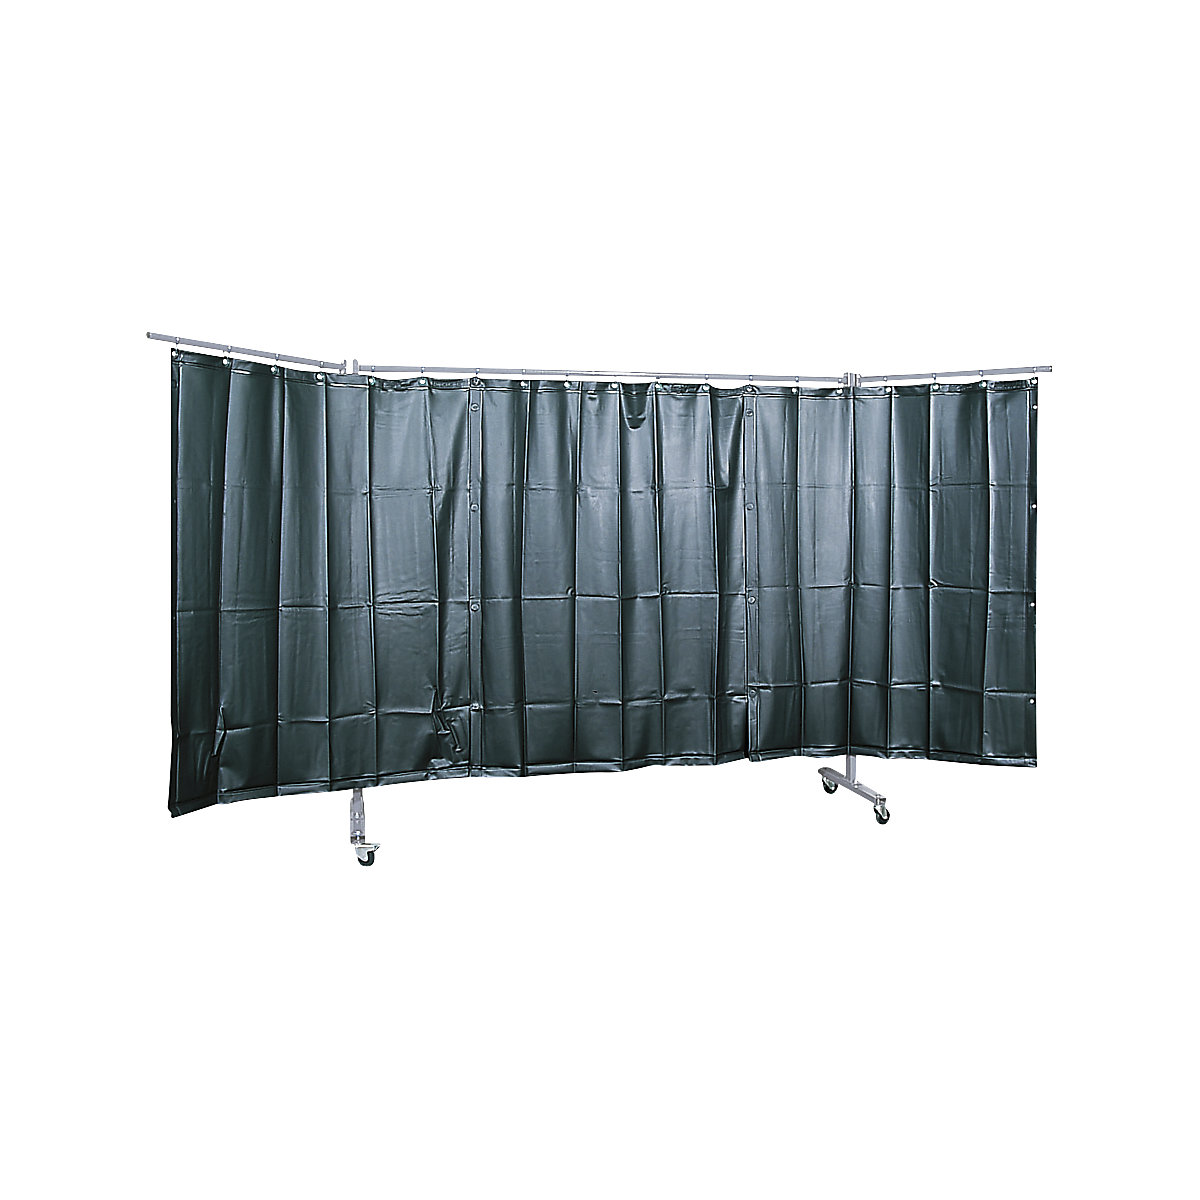 Mobile welding protection screen, 3-part model, HxW 1930 x 3800 mm, with welding protection film, dark green